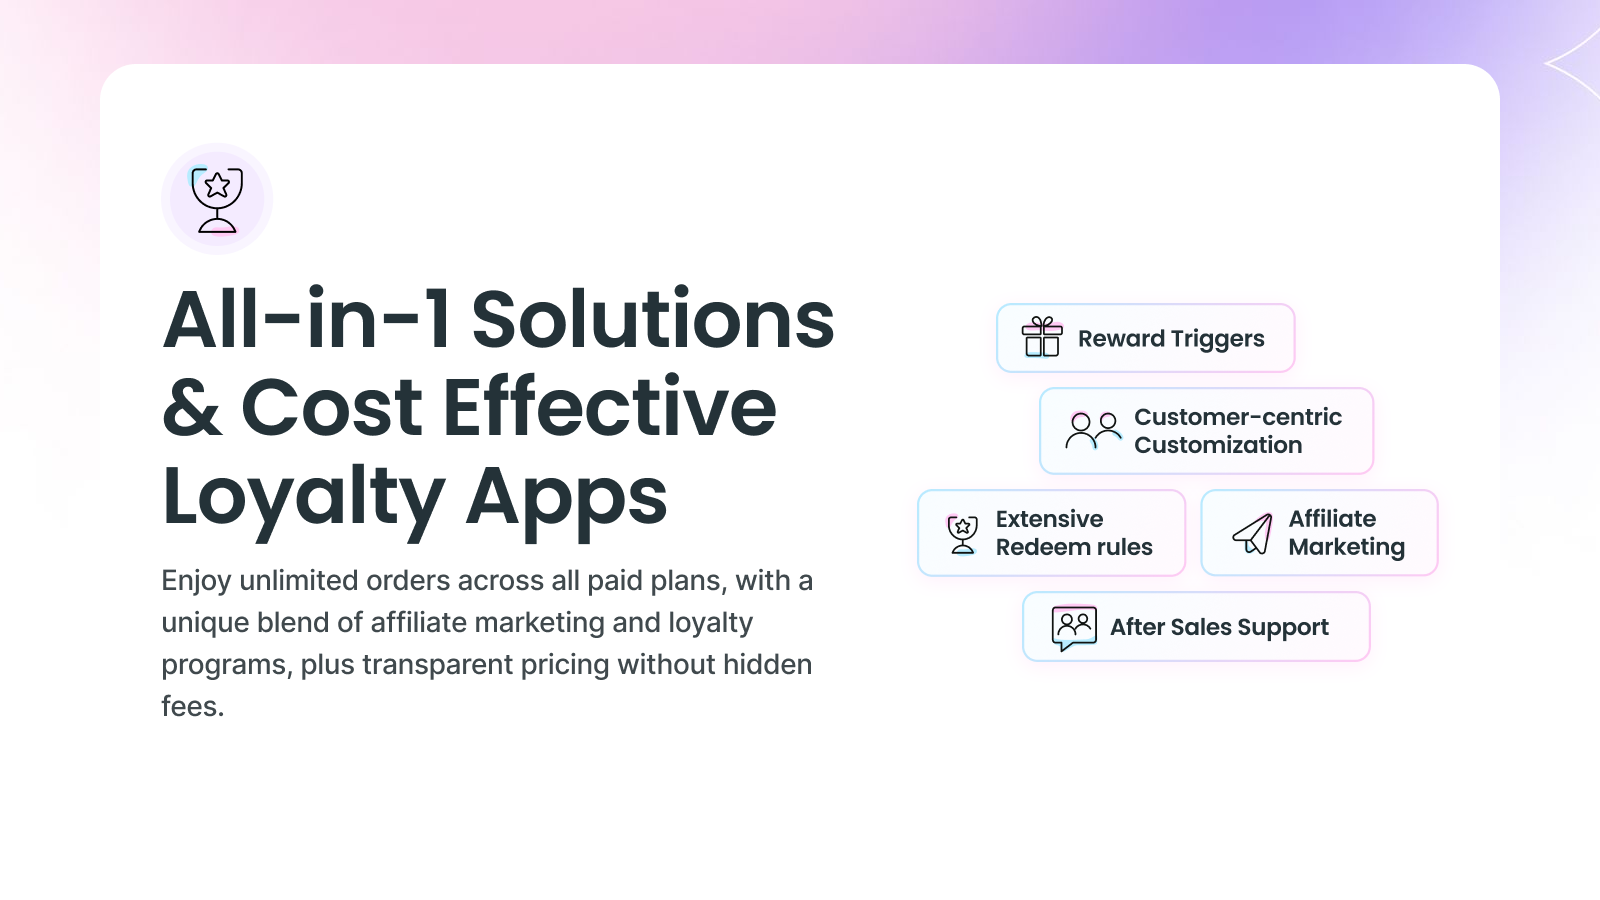 All-in-one-solution and cost effective loyalty program